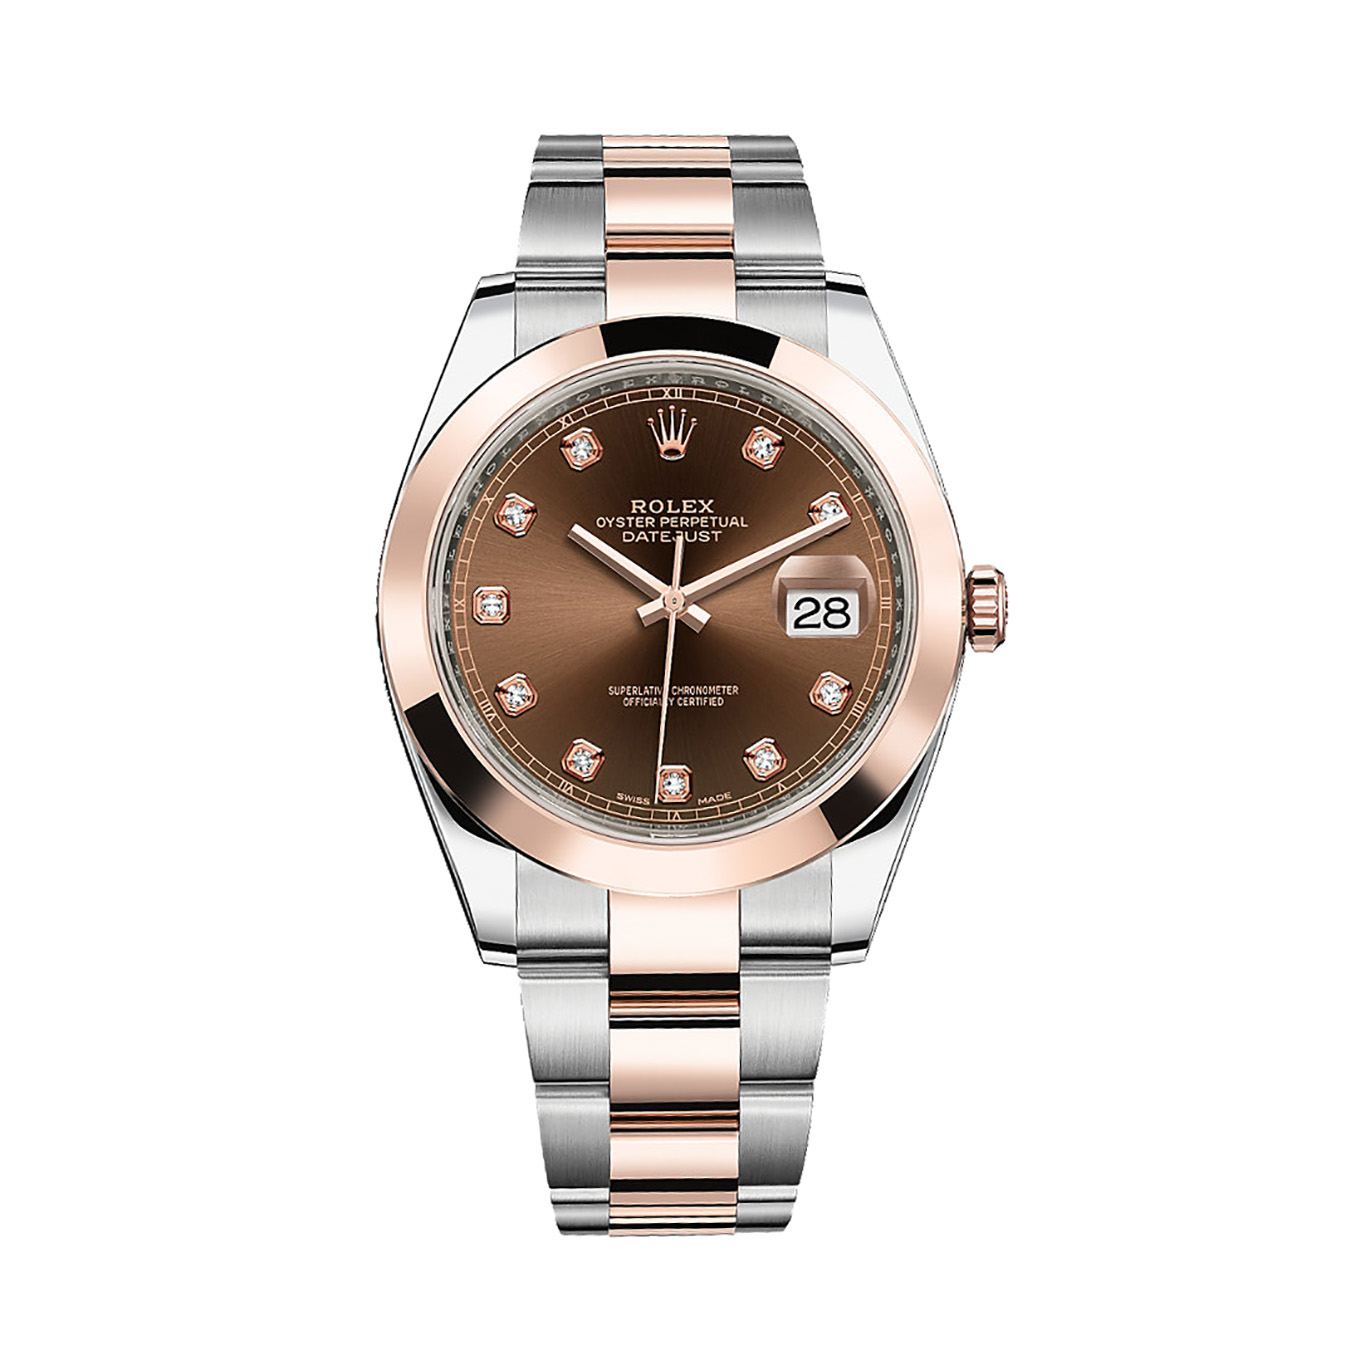 Datejust 41 126301 Rose Gold & Stainless Steel Watch (Chocolate Set With Diamonds)